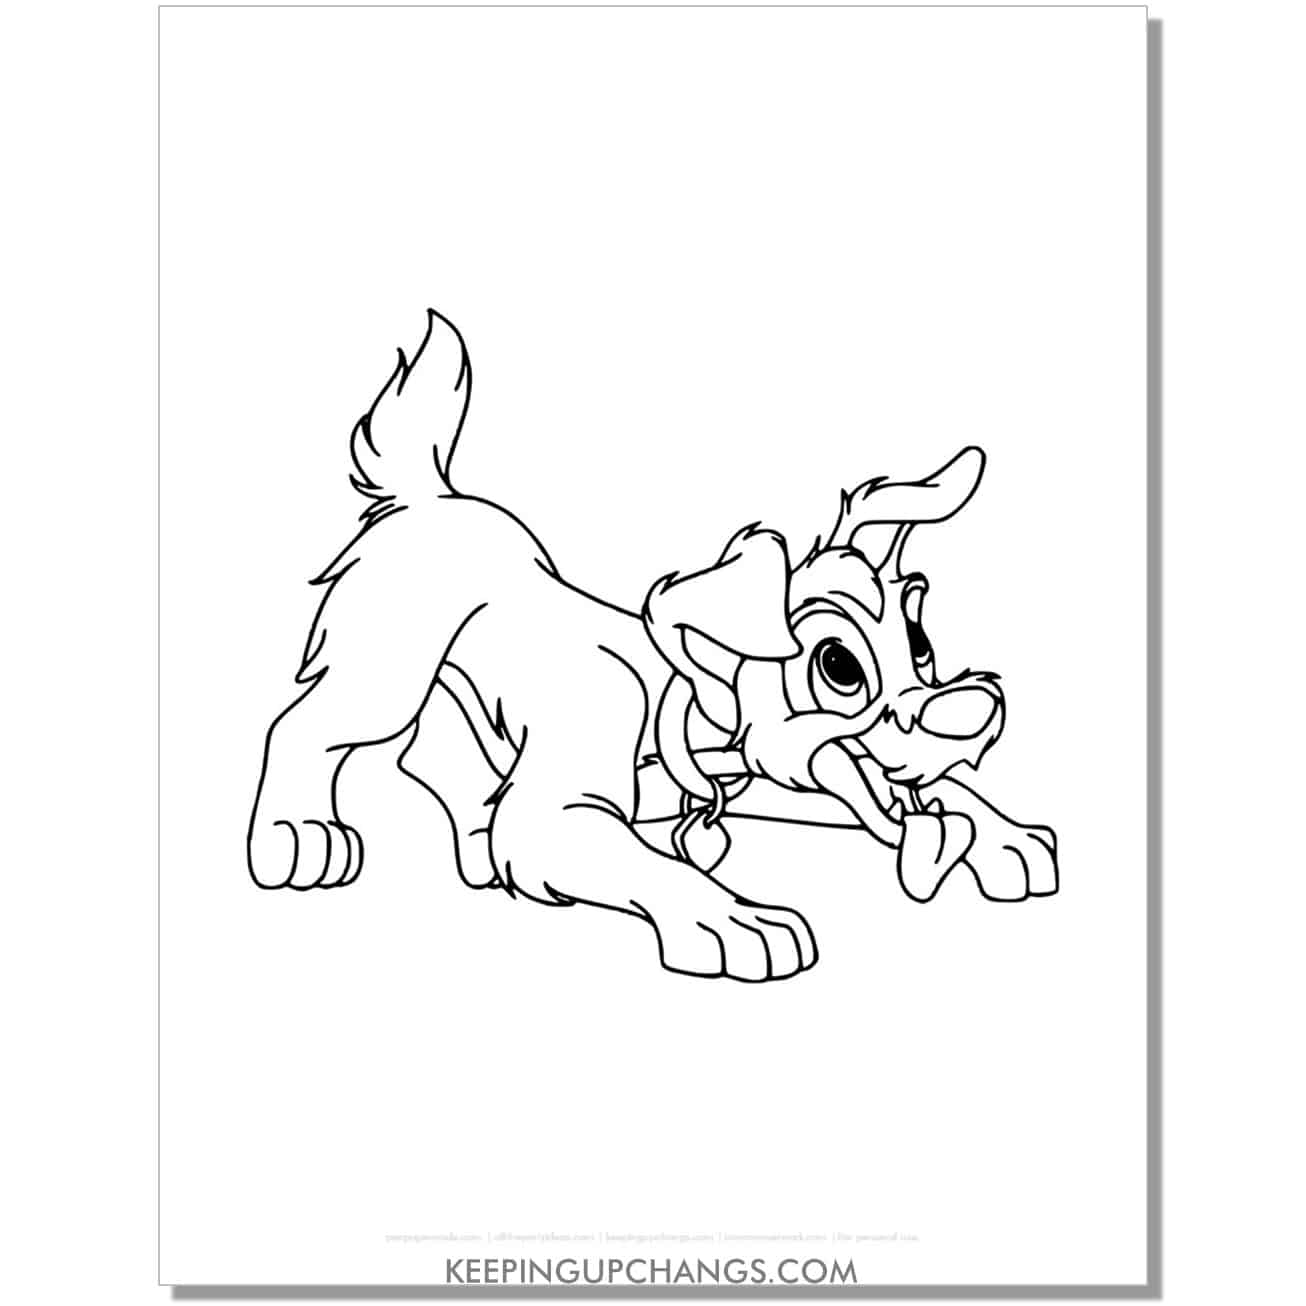 free scamp ready to jump from lady and the tramp coloring page, sheet.